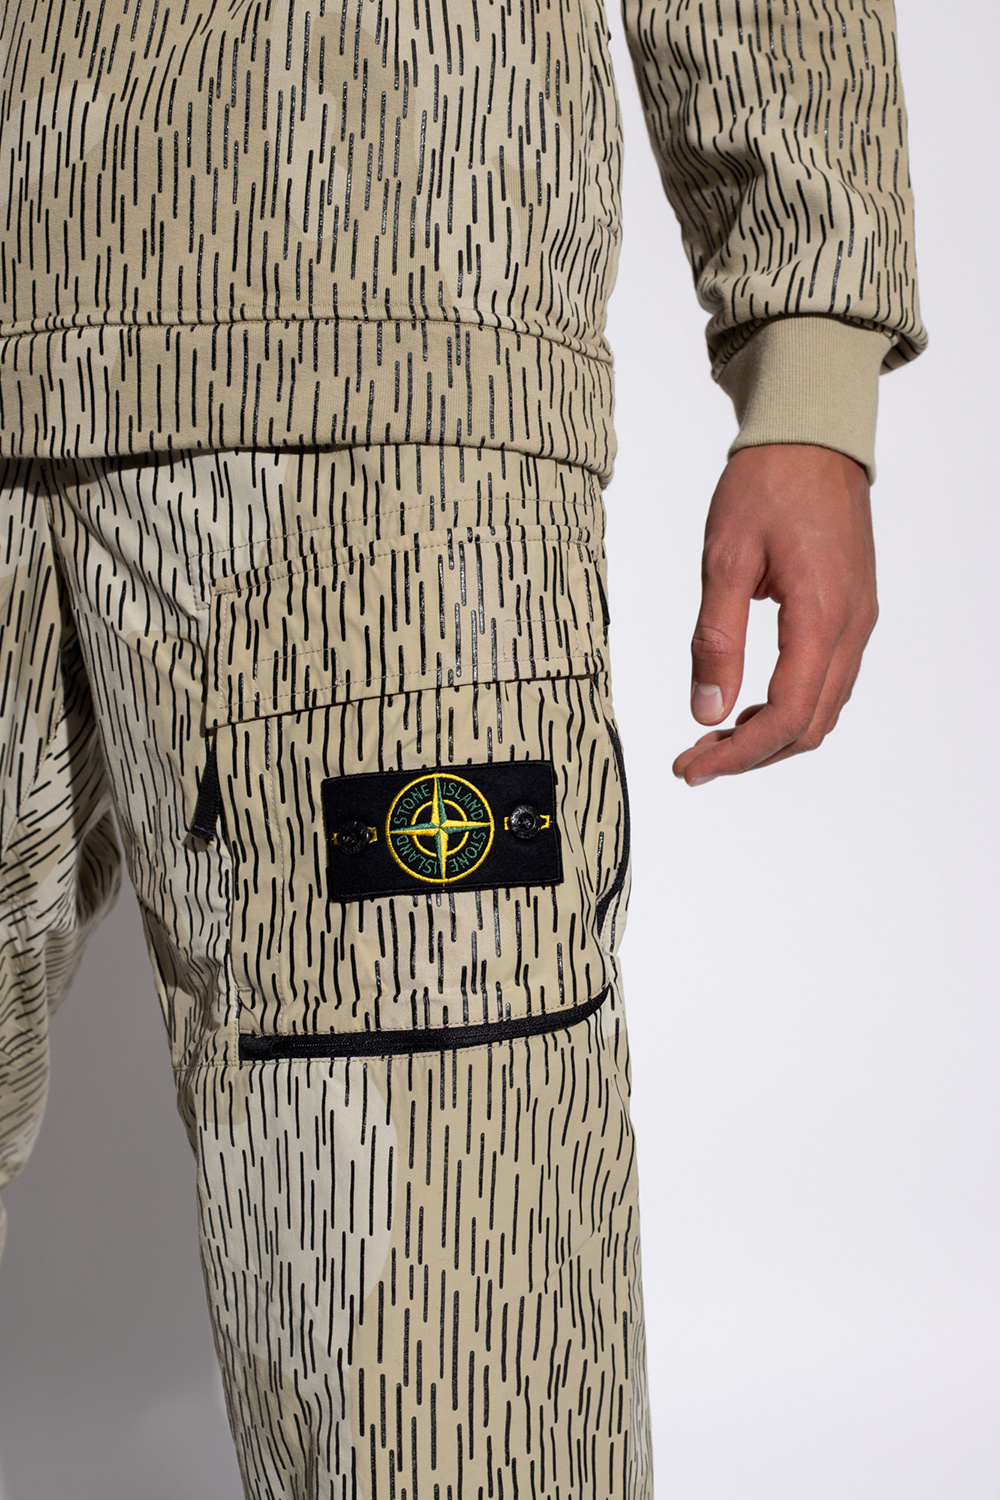 Stone Island Patterned trousers